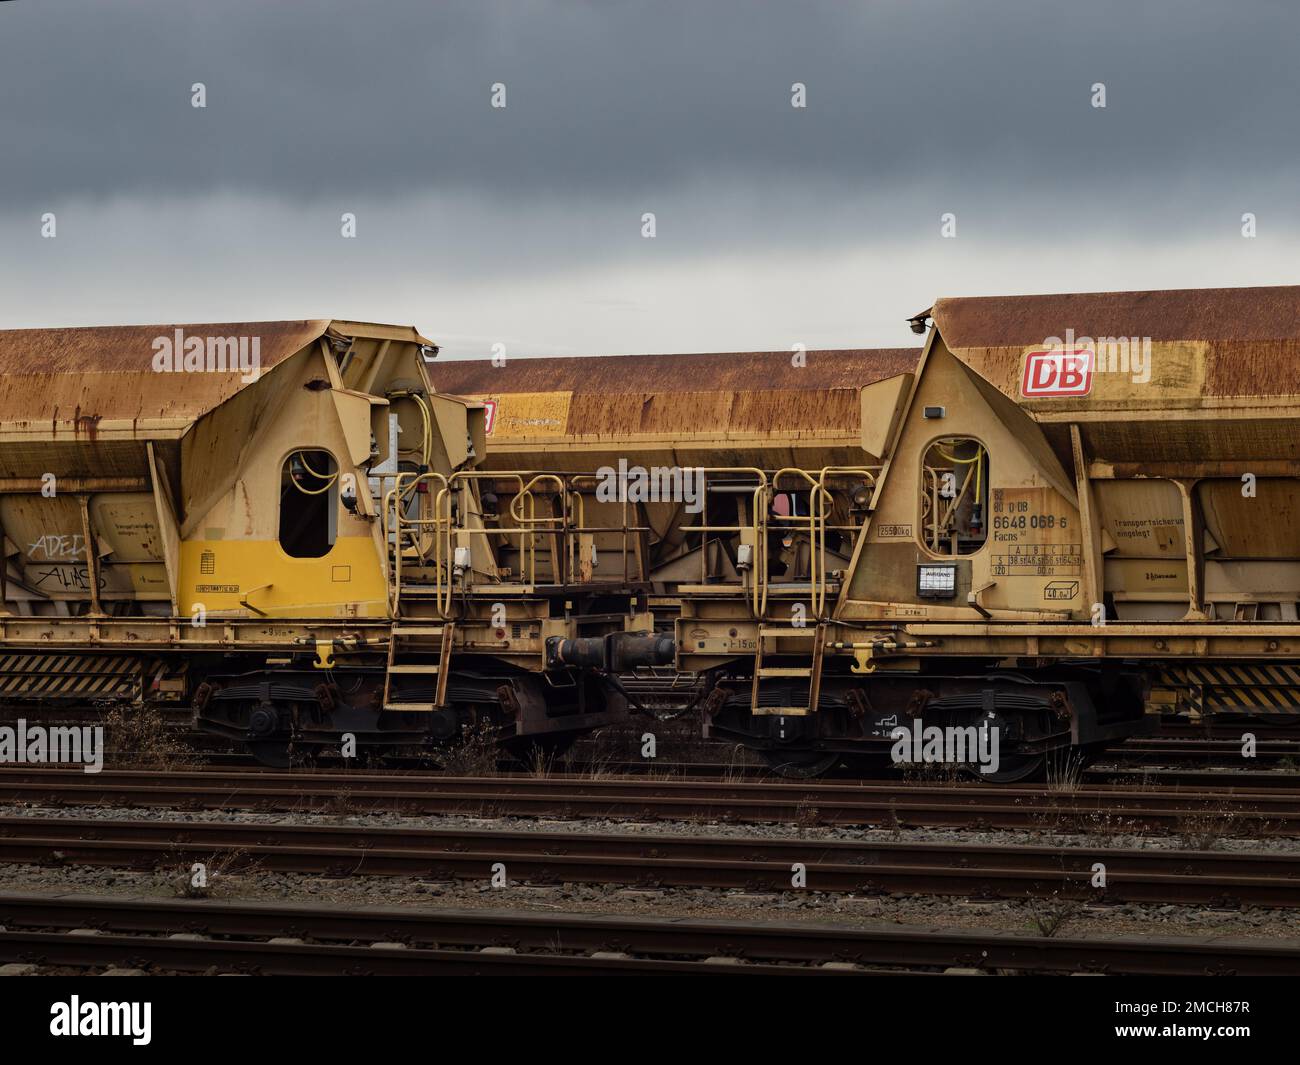 Facns 141 open freight wagons of the Deutsche Bahn company. Rusty steel on the rails in a dark environment. DB cargo ballast wagons as technology. Stock Photo